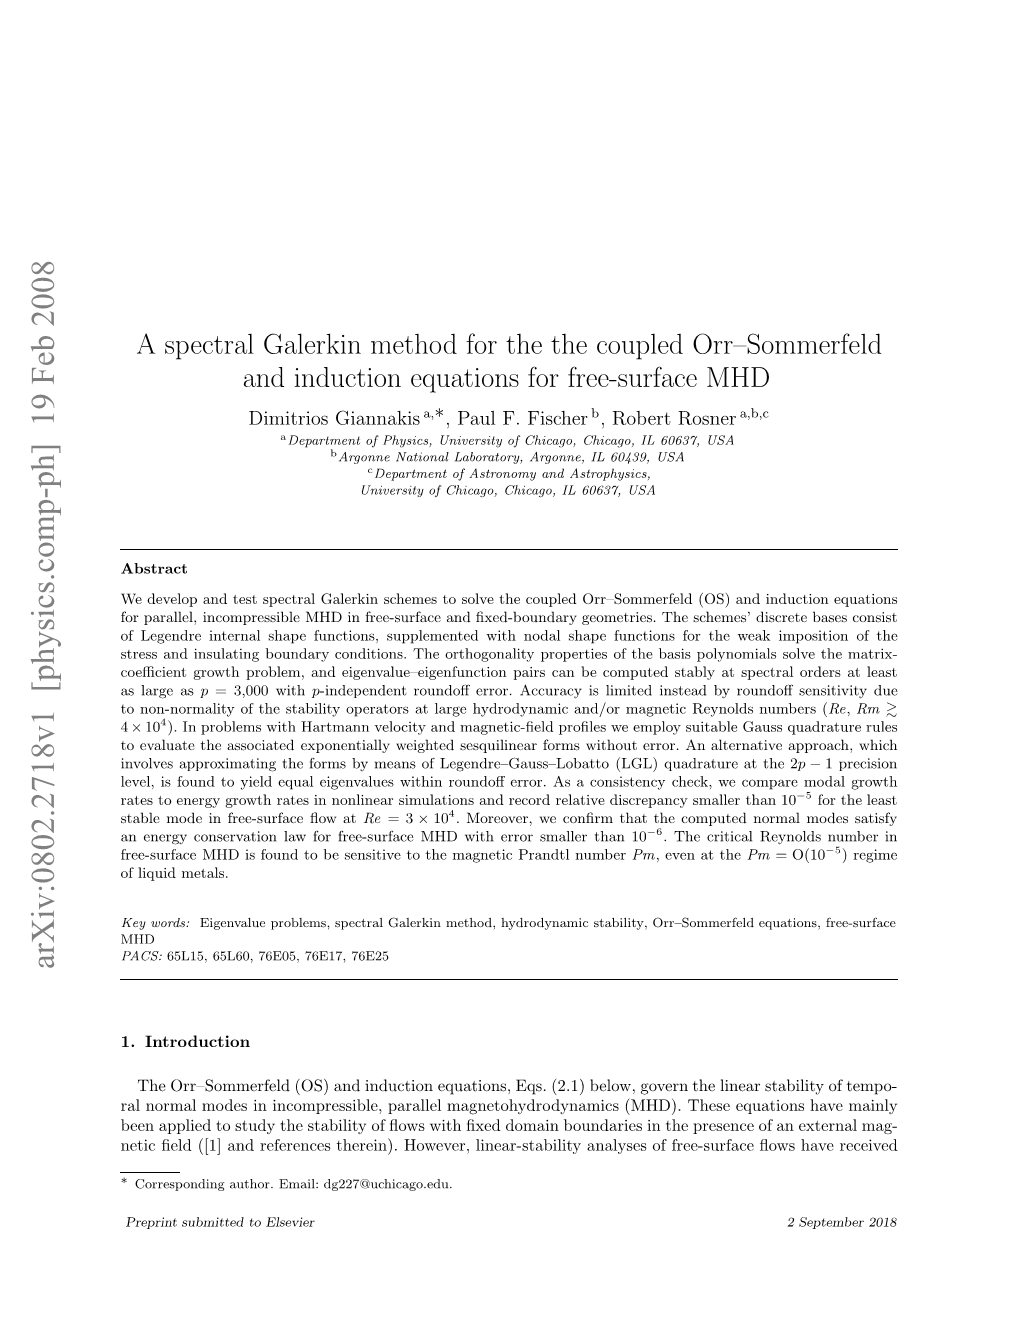 A Spectral Galerkin Method for the Coupled Orr-Sommerfeld And